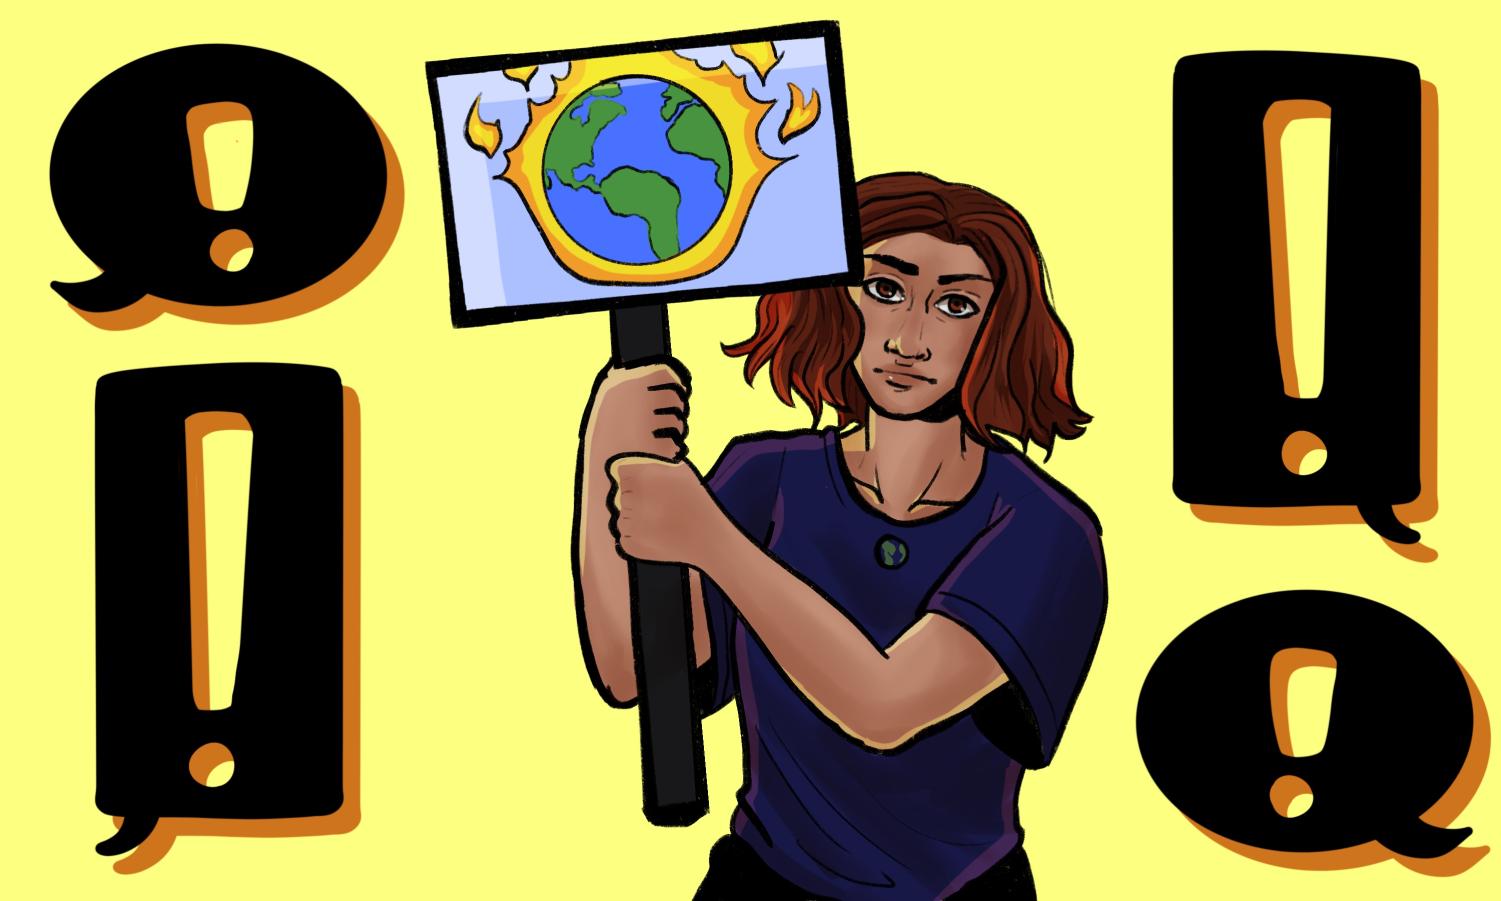 Illustration+of+a+person+holding+a+sign+with+a+globe+in+front+of+a+yellow+background.+Speech+bubbles+surround+the+person.